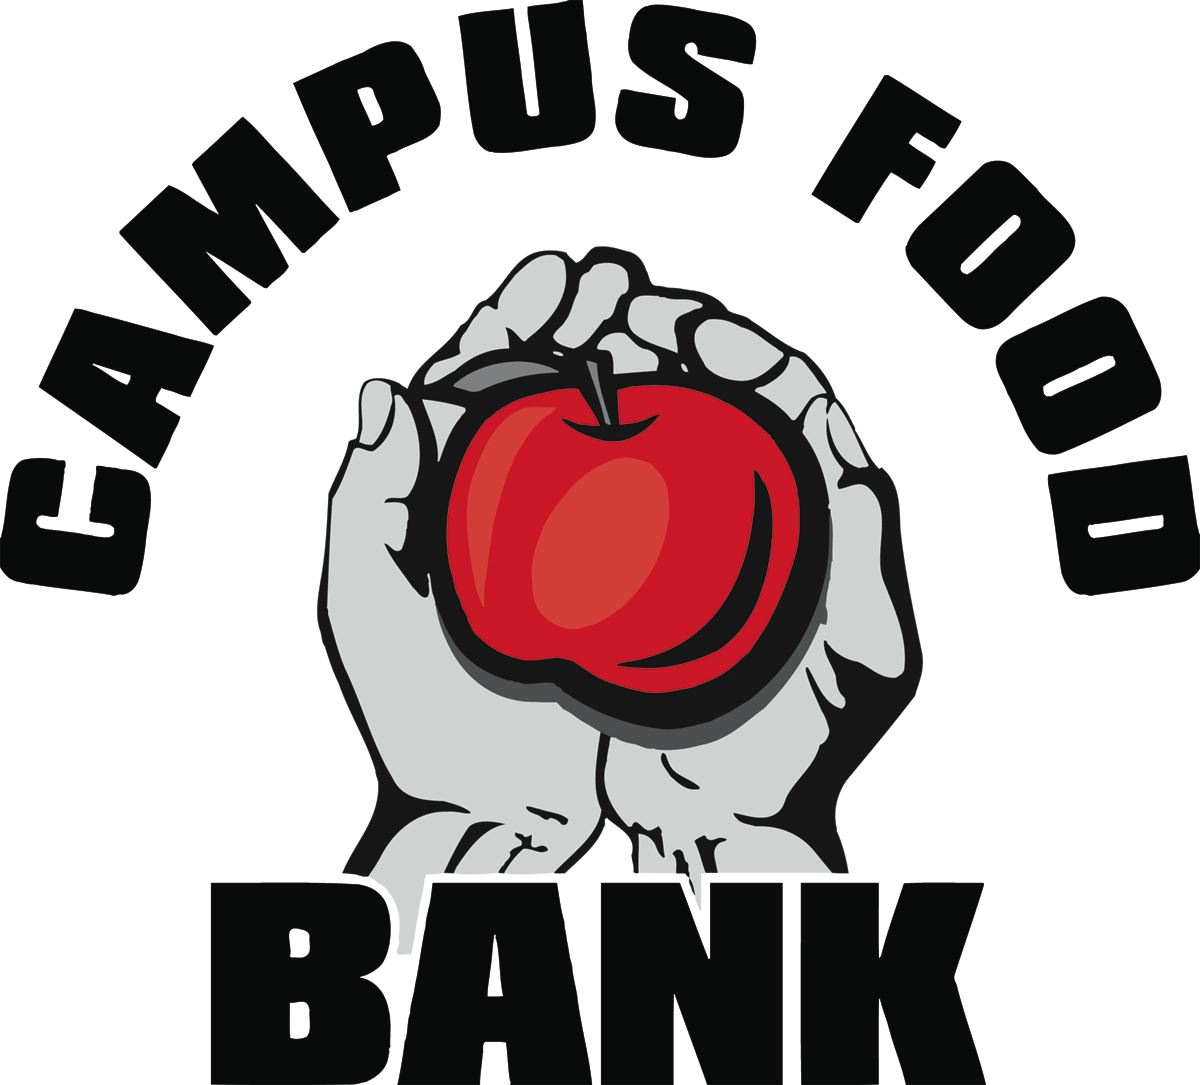 Campus Food Bank logo shows hands holding an apple